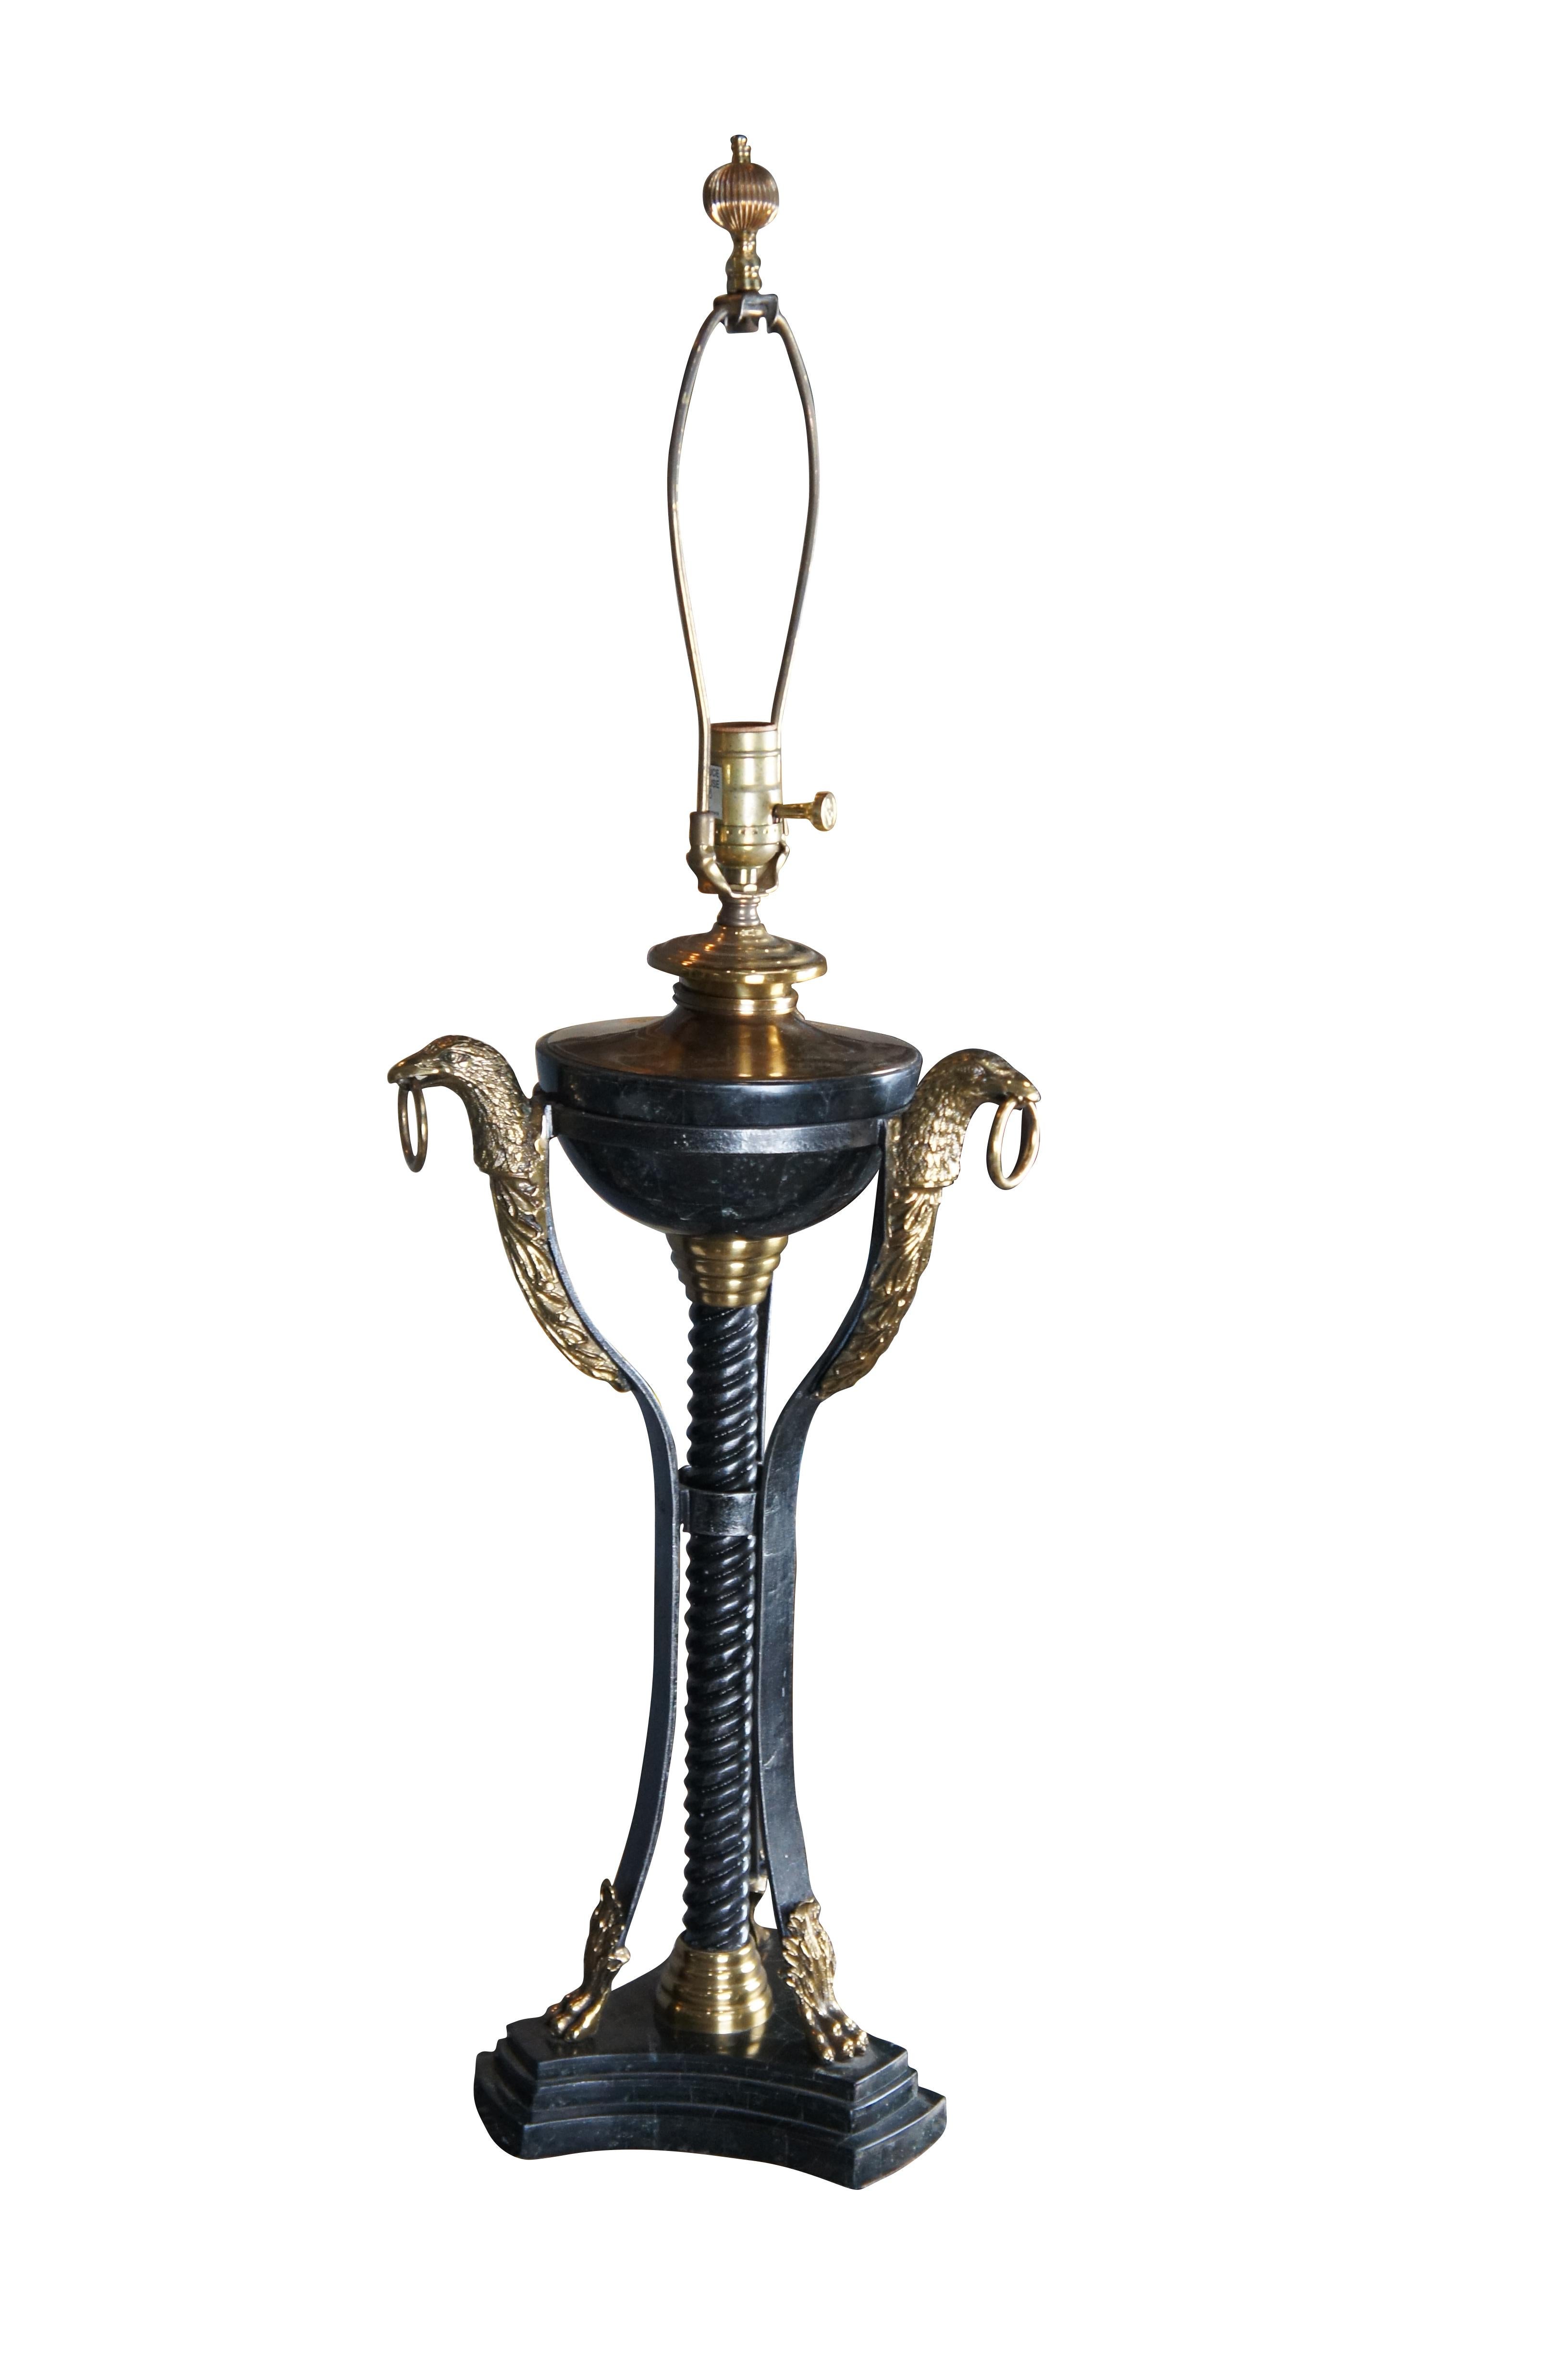 Late 20th century, iron, brass and tessellated marble table lamp by Maitland Smith. Features an oil urn shaped body over twisted iron supports and stepped tripod plinth base. The urn portion is connected to three brass eagle heads supports leading